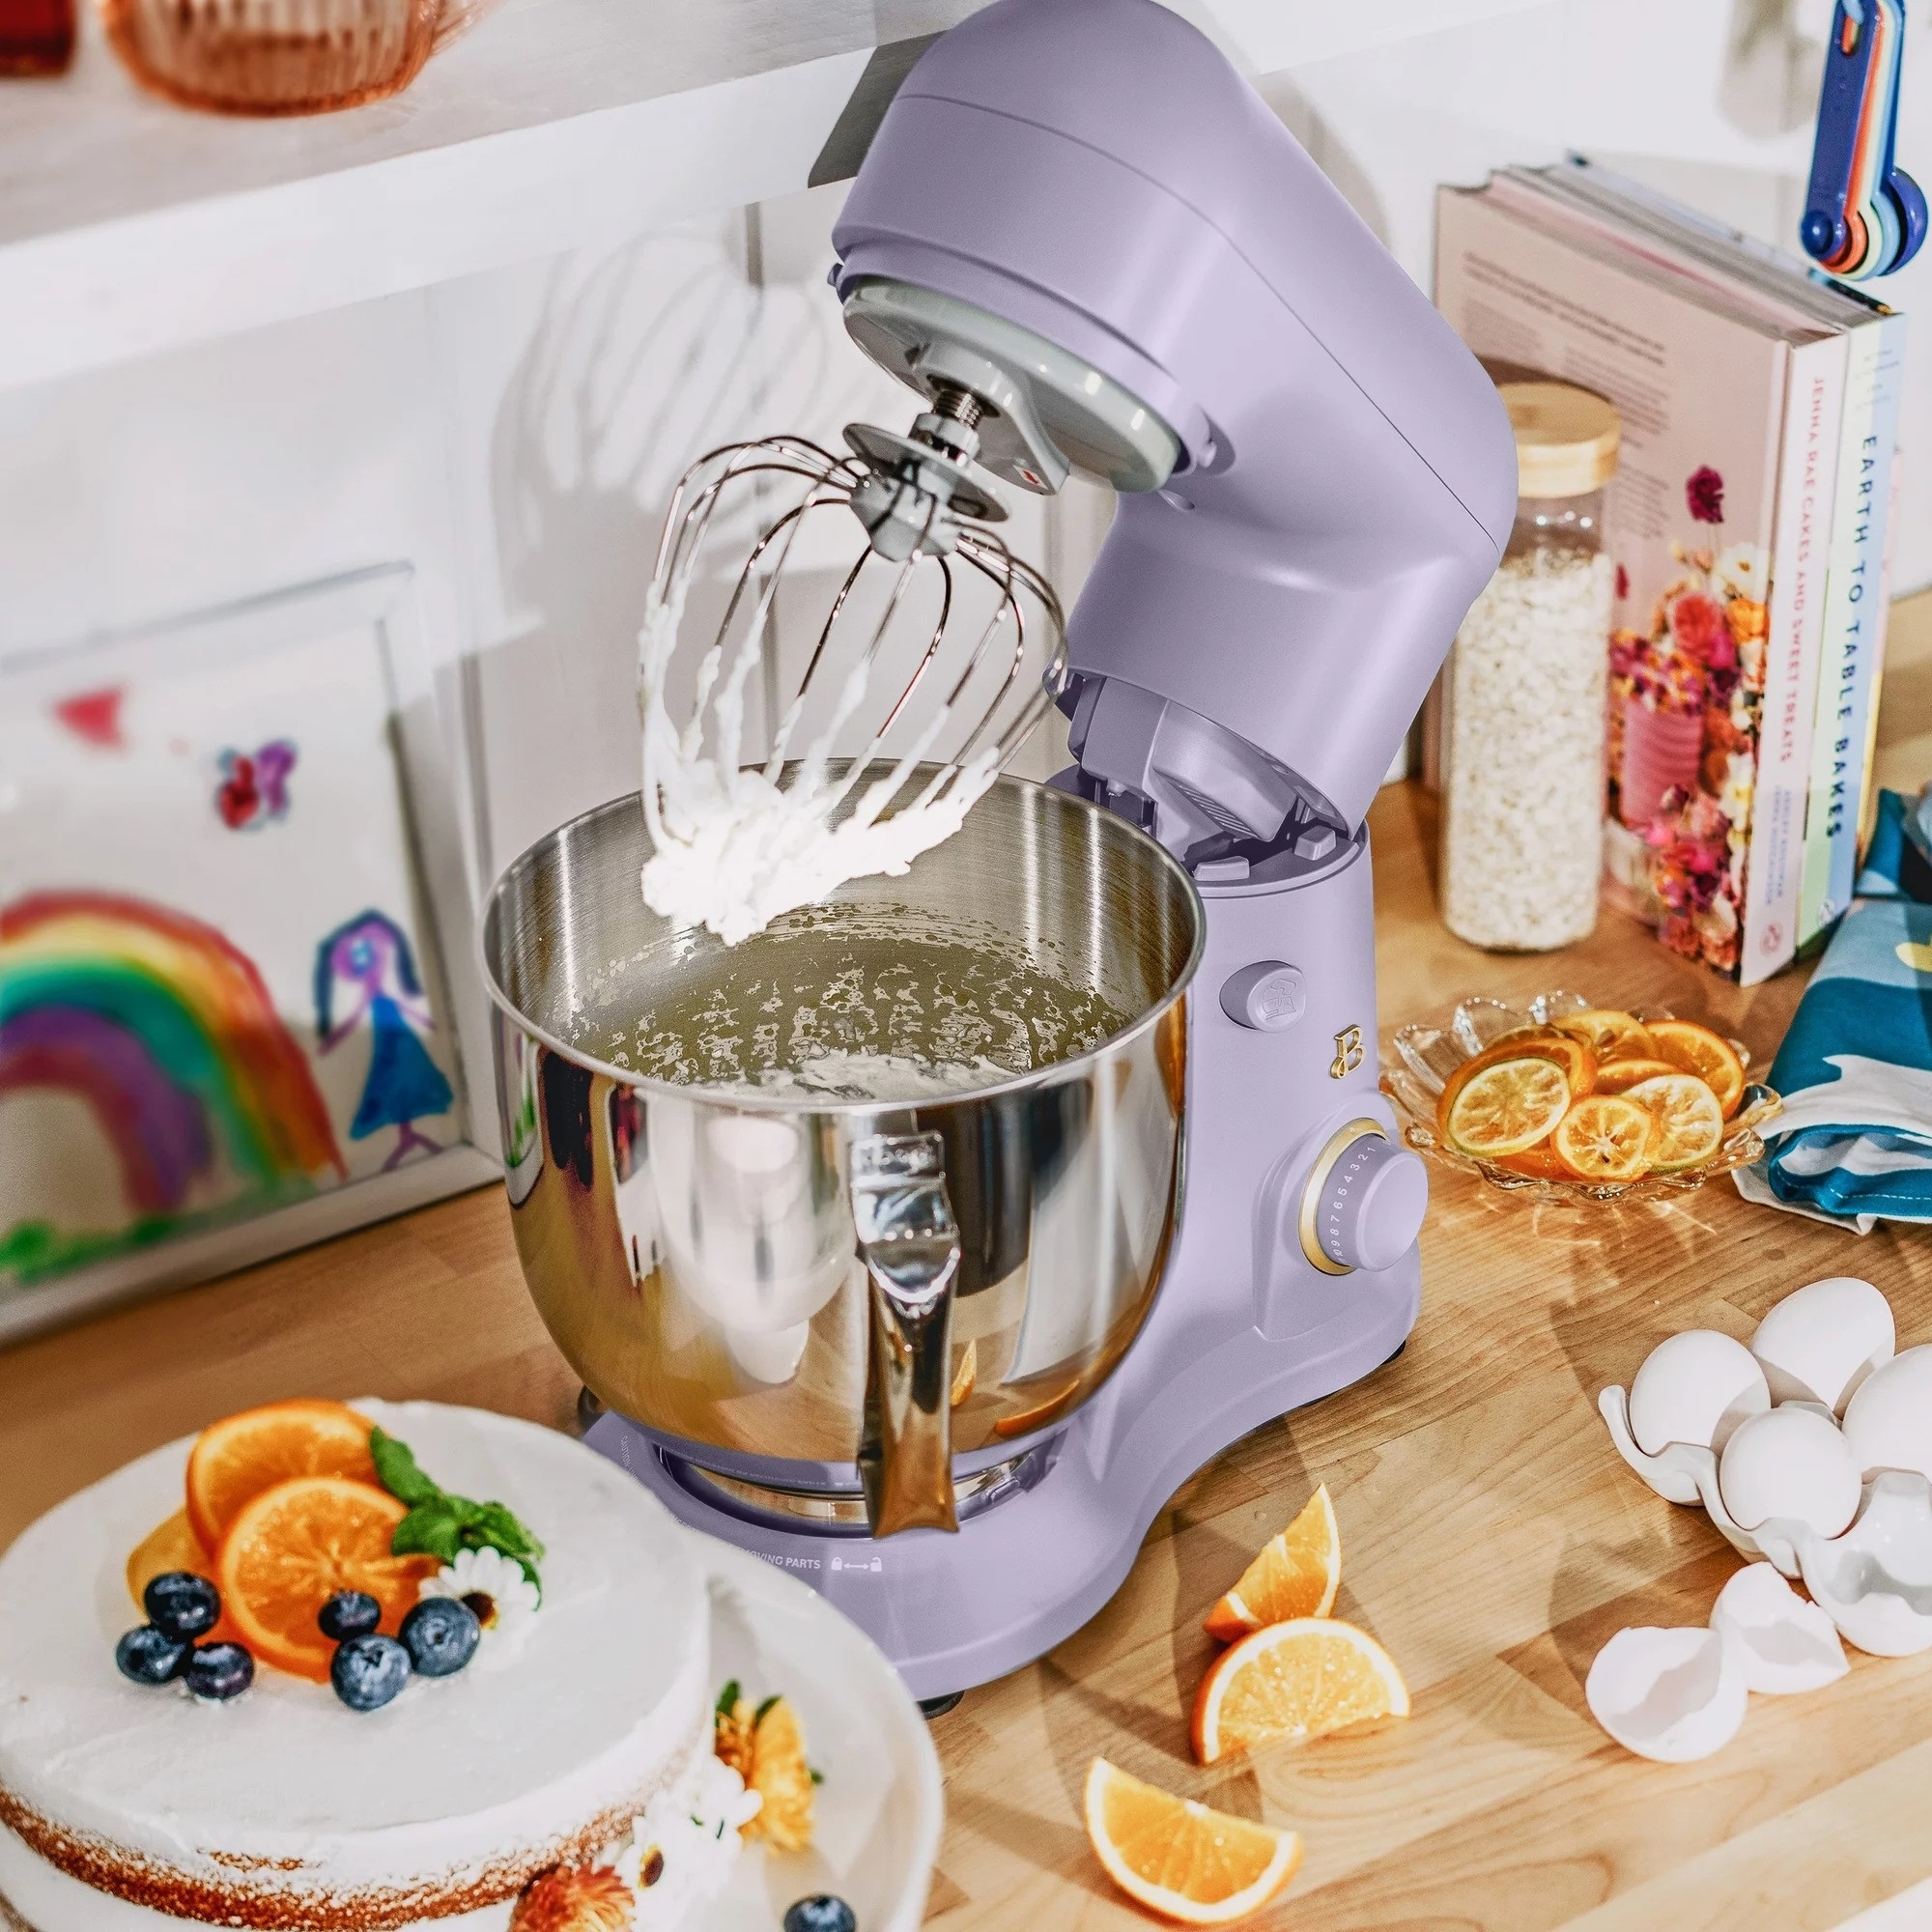 Stand mixer on a kitchen counter with ingredients around, mixing batter for baking